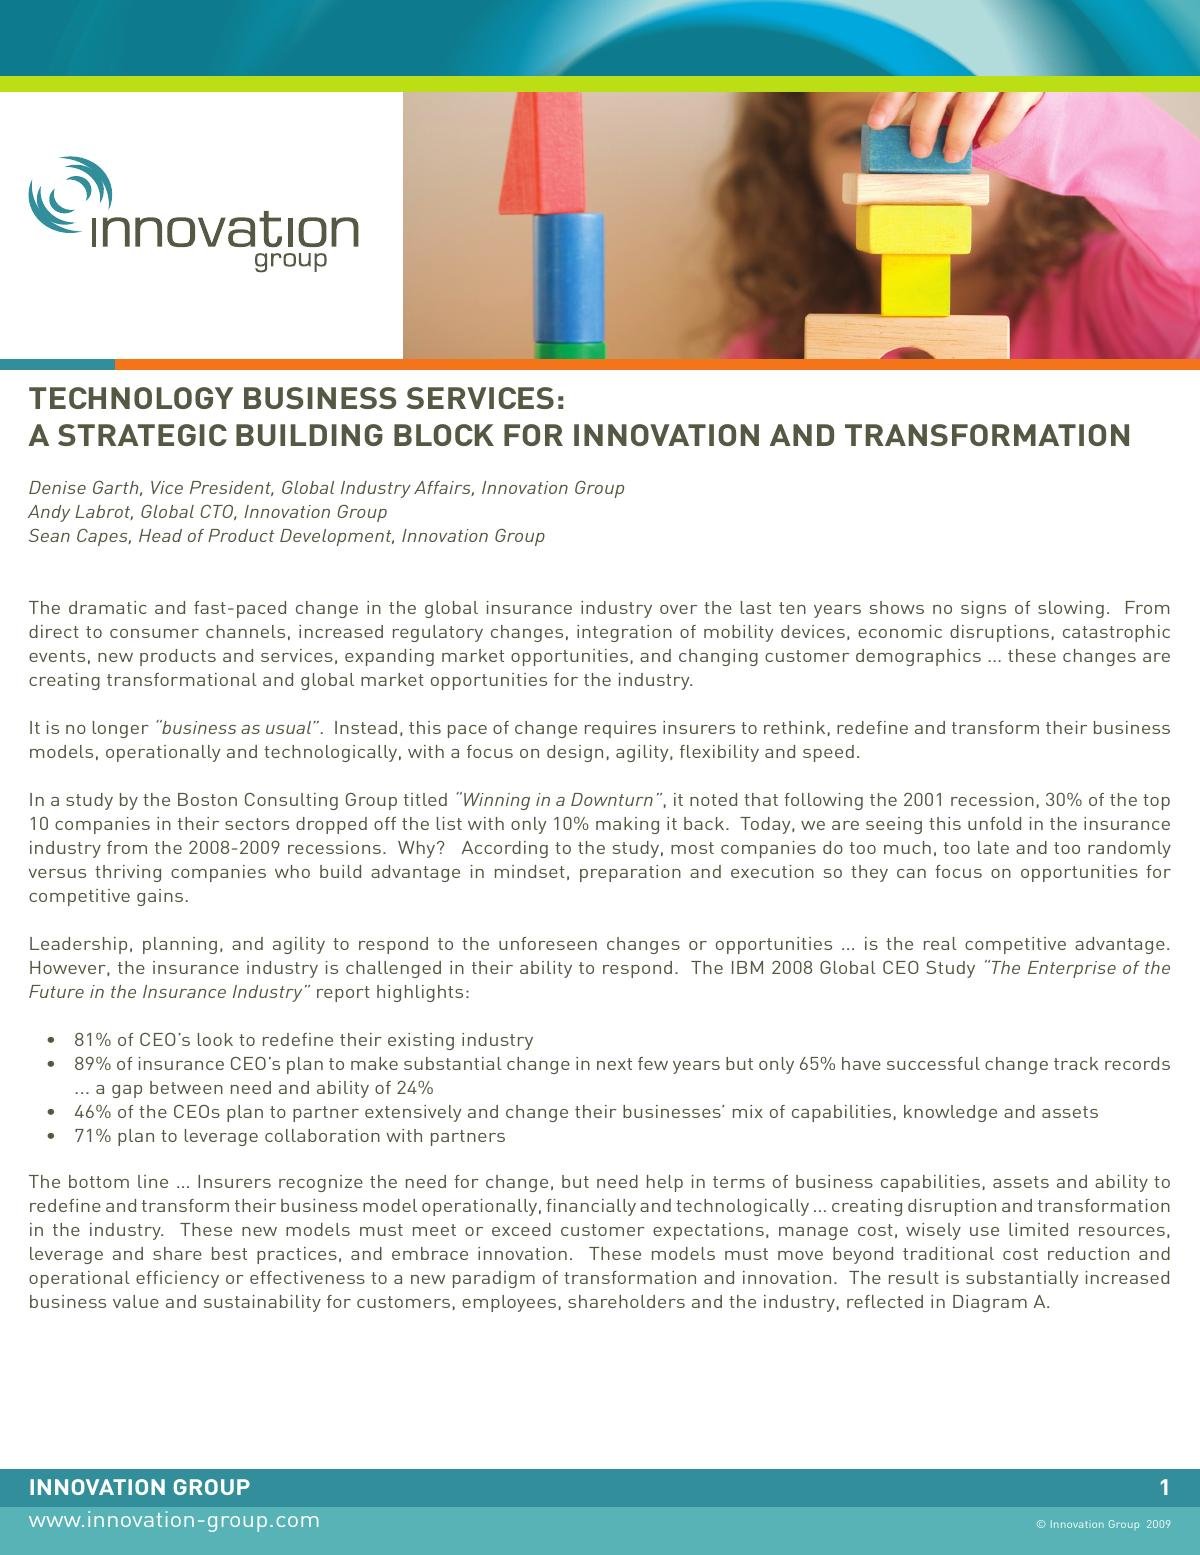 Technology Business Services:Strategic Building Block for Innovation and Transformation